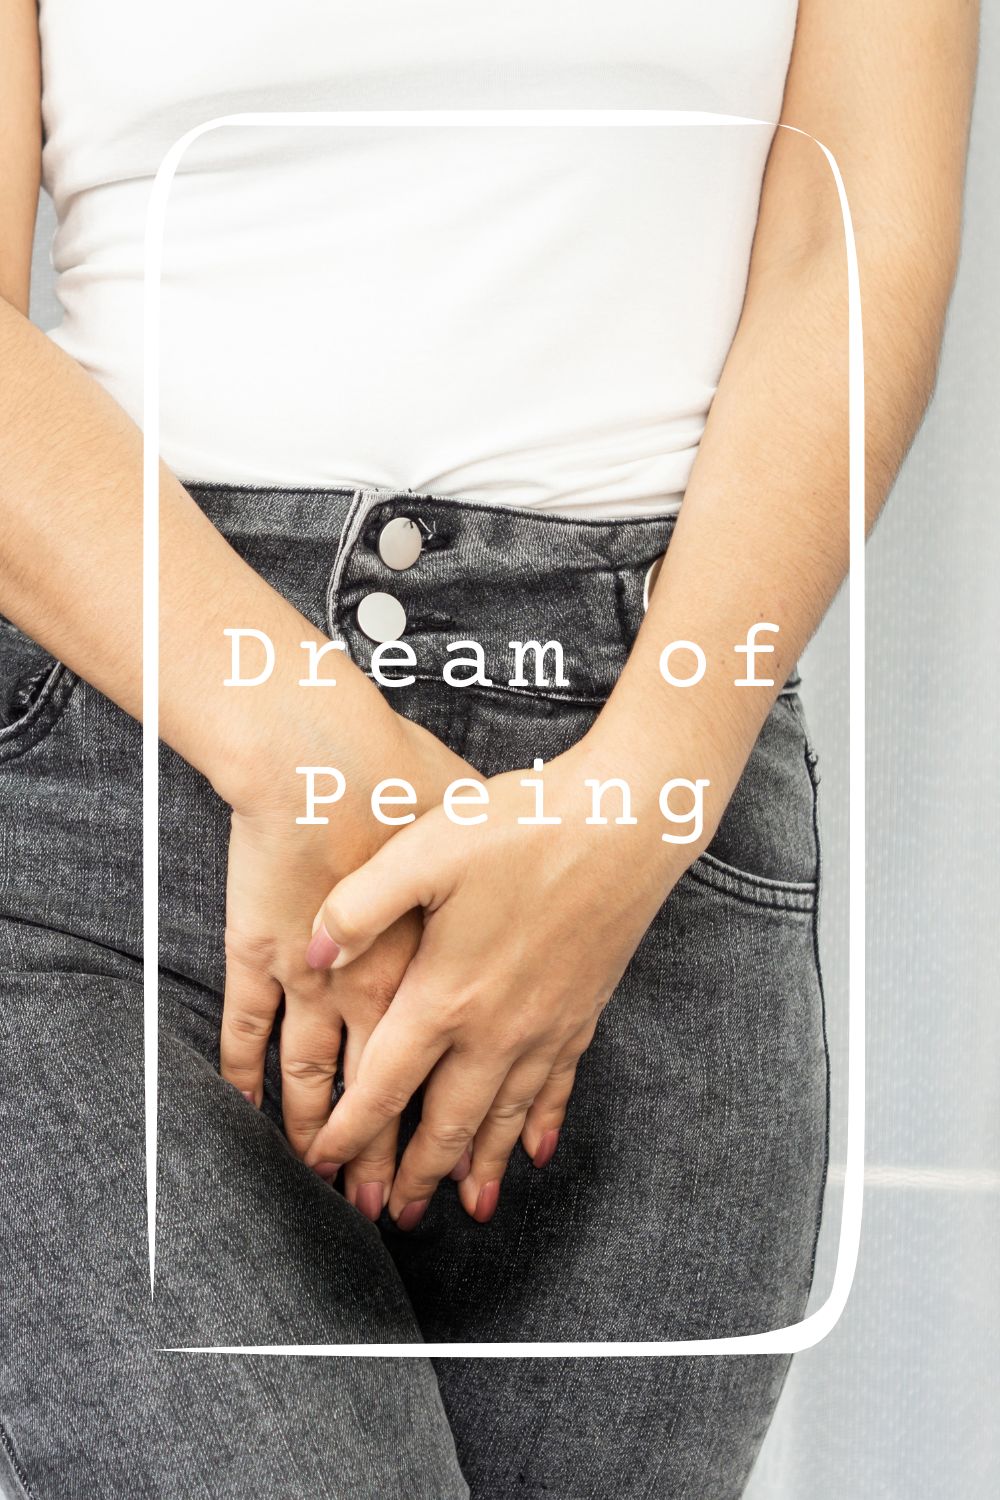 12 Dream of Peeing Meanings1